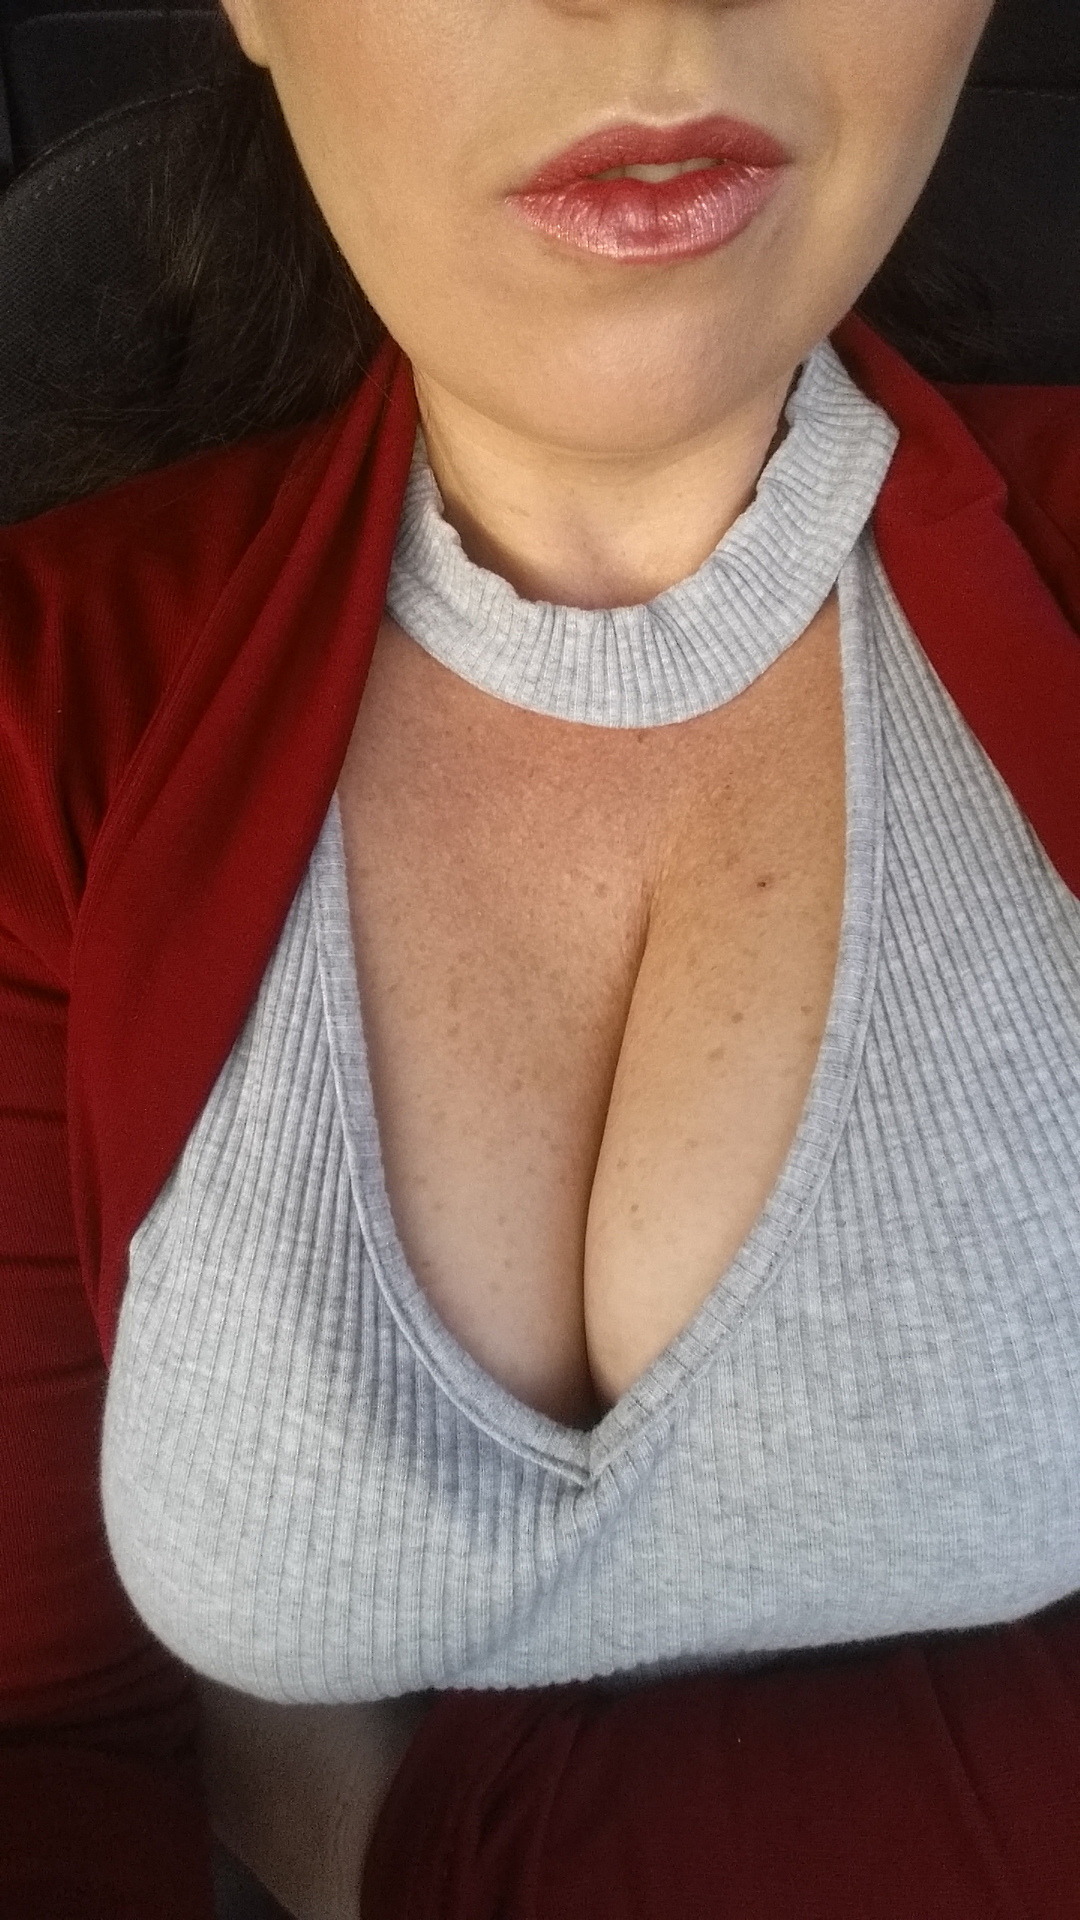 thenippleguy:  mywifeizhot:Who wants to cock and cum on my photos? 😍😍 send